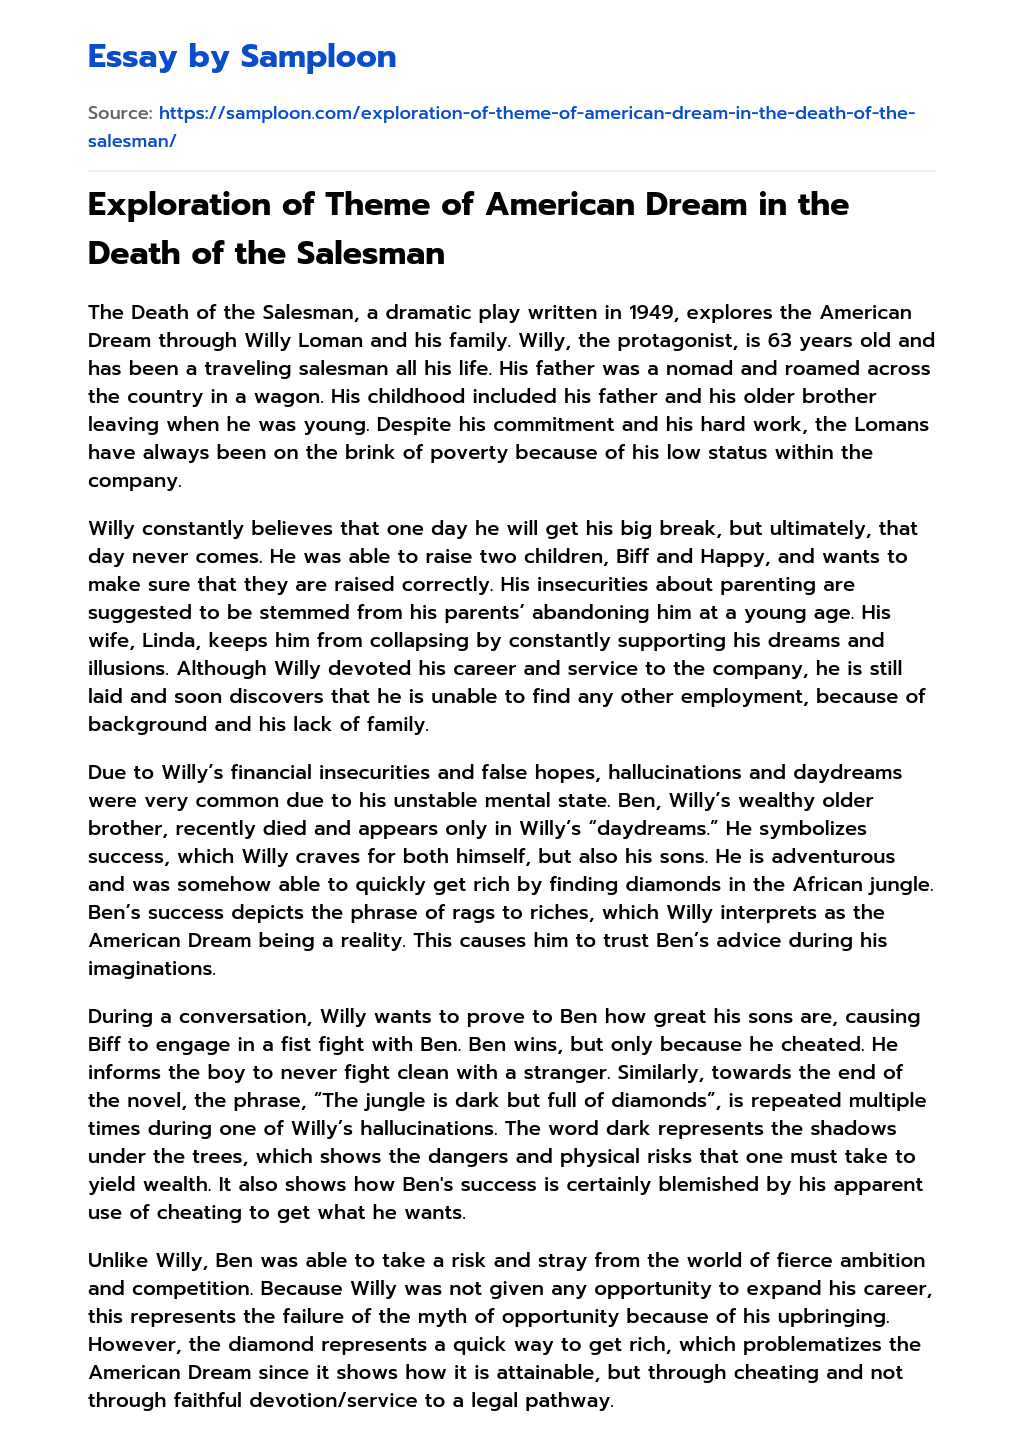 Exploration of Theme of American Dream in the Death of the Salesman essay